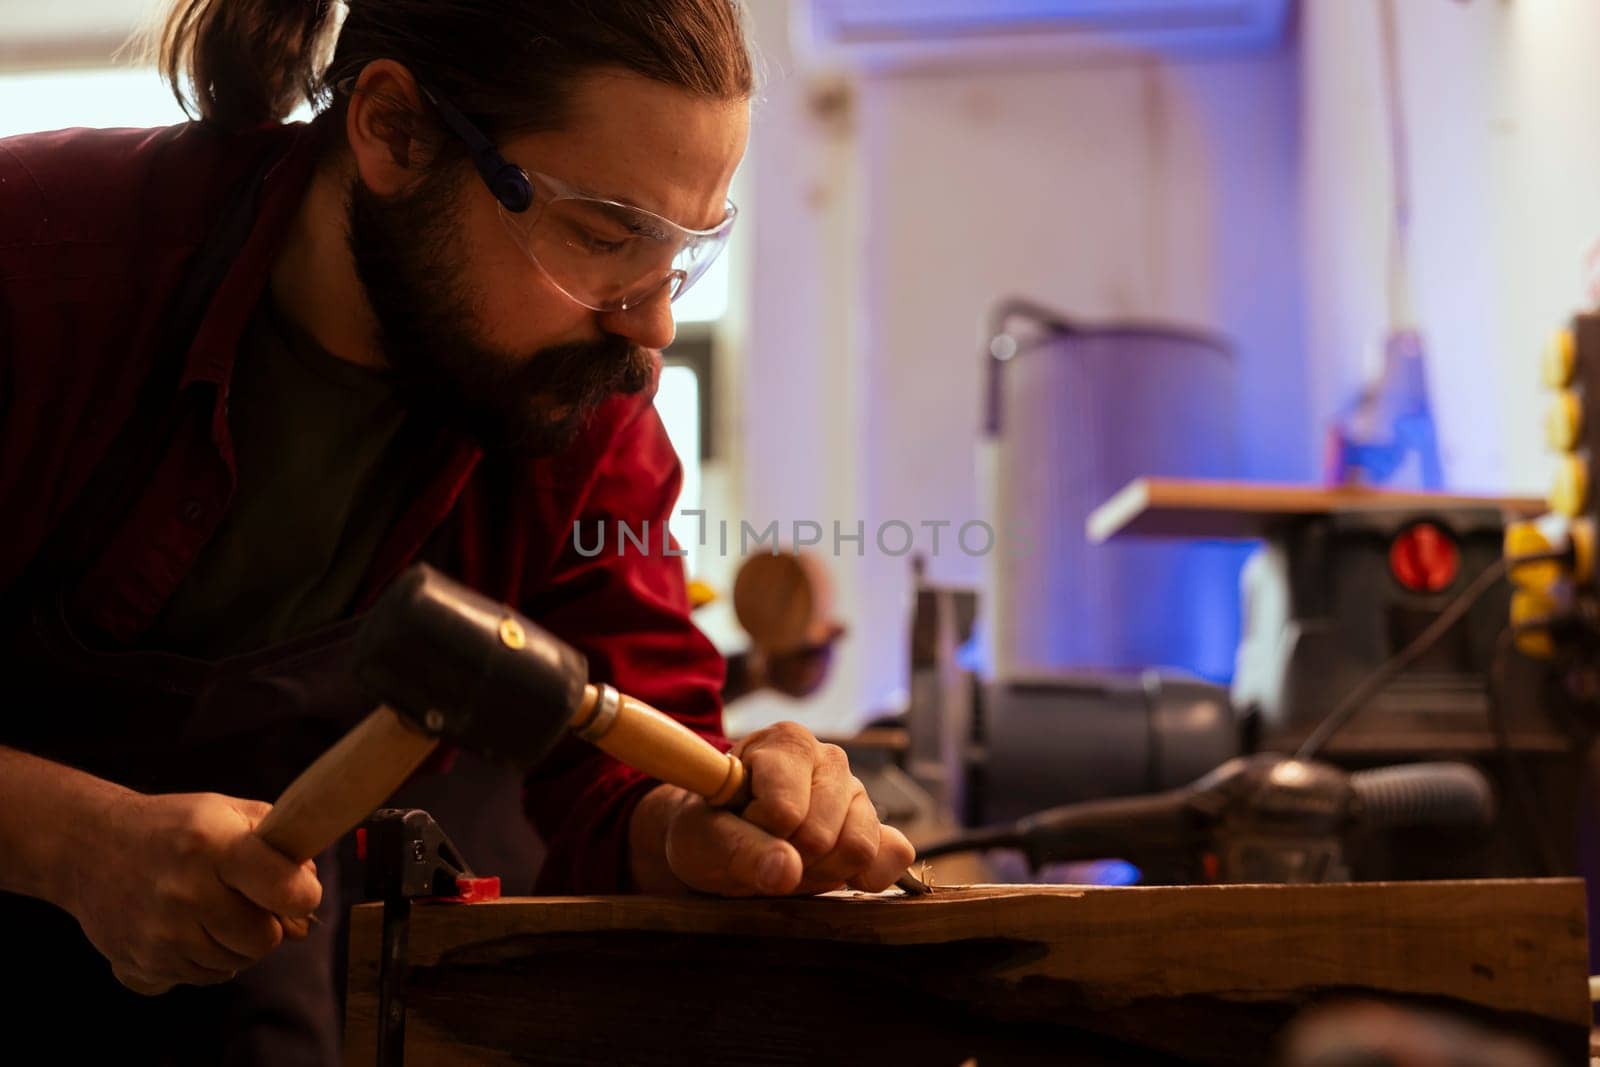 Man shaping raw timber using chisel and hammer in carpentry shop, wearing safety glasses to avoid injury. Woodworking expert making wood sculptures using protective gear to prevent workplace accidents